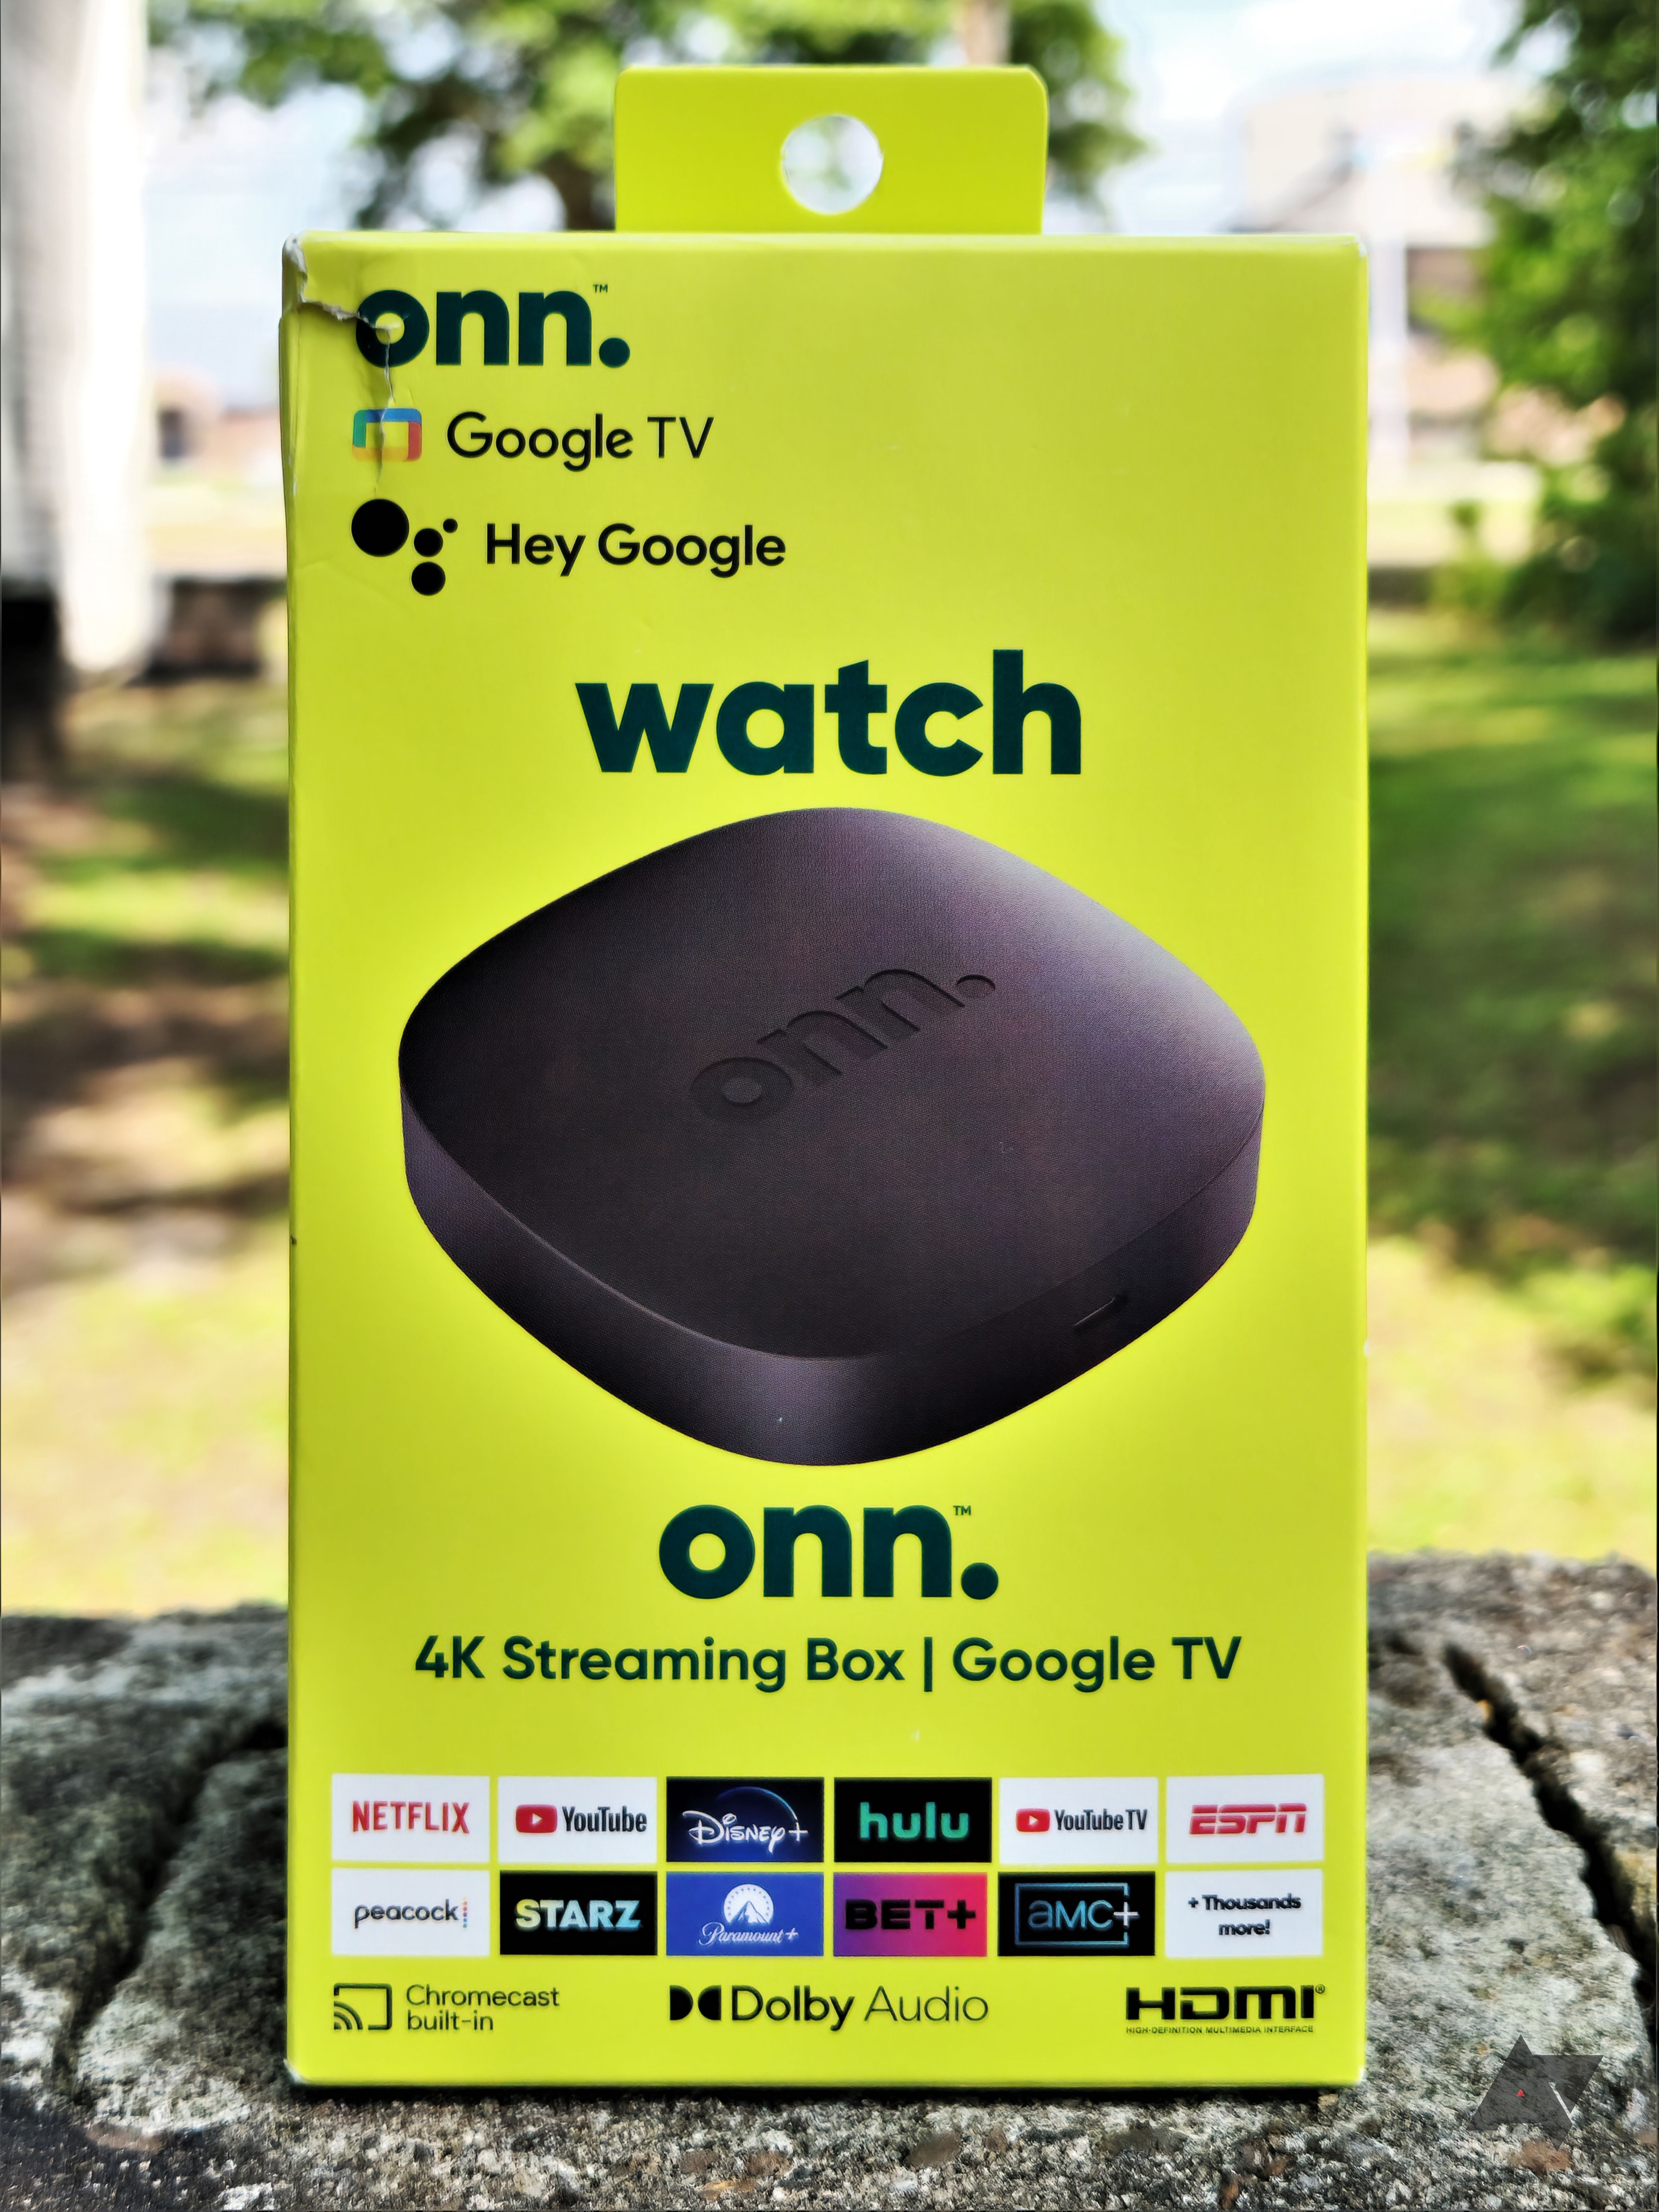 The 4K Chromecast with Google TV is back on sale for $40